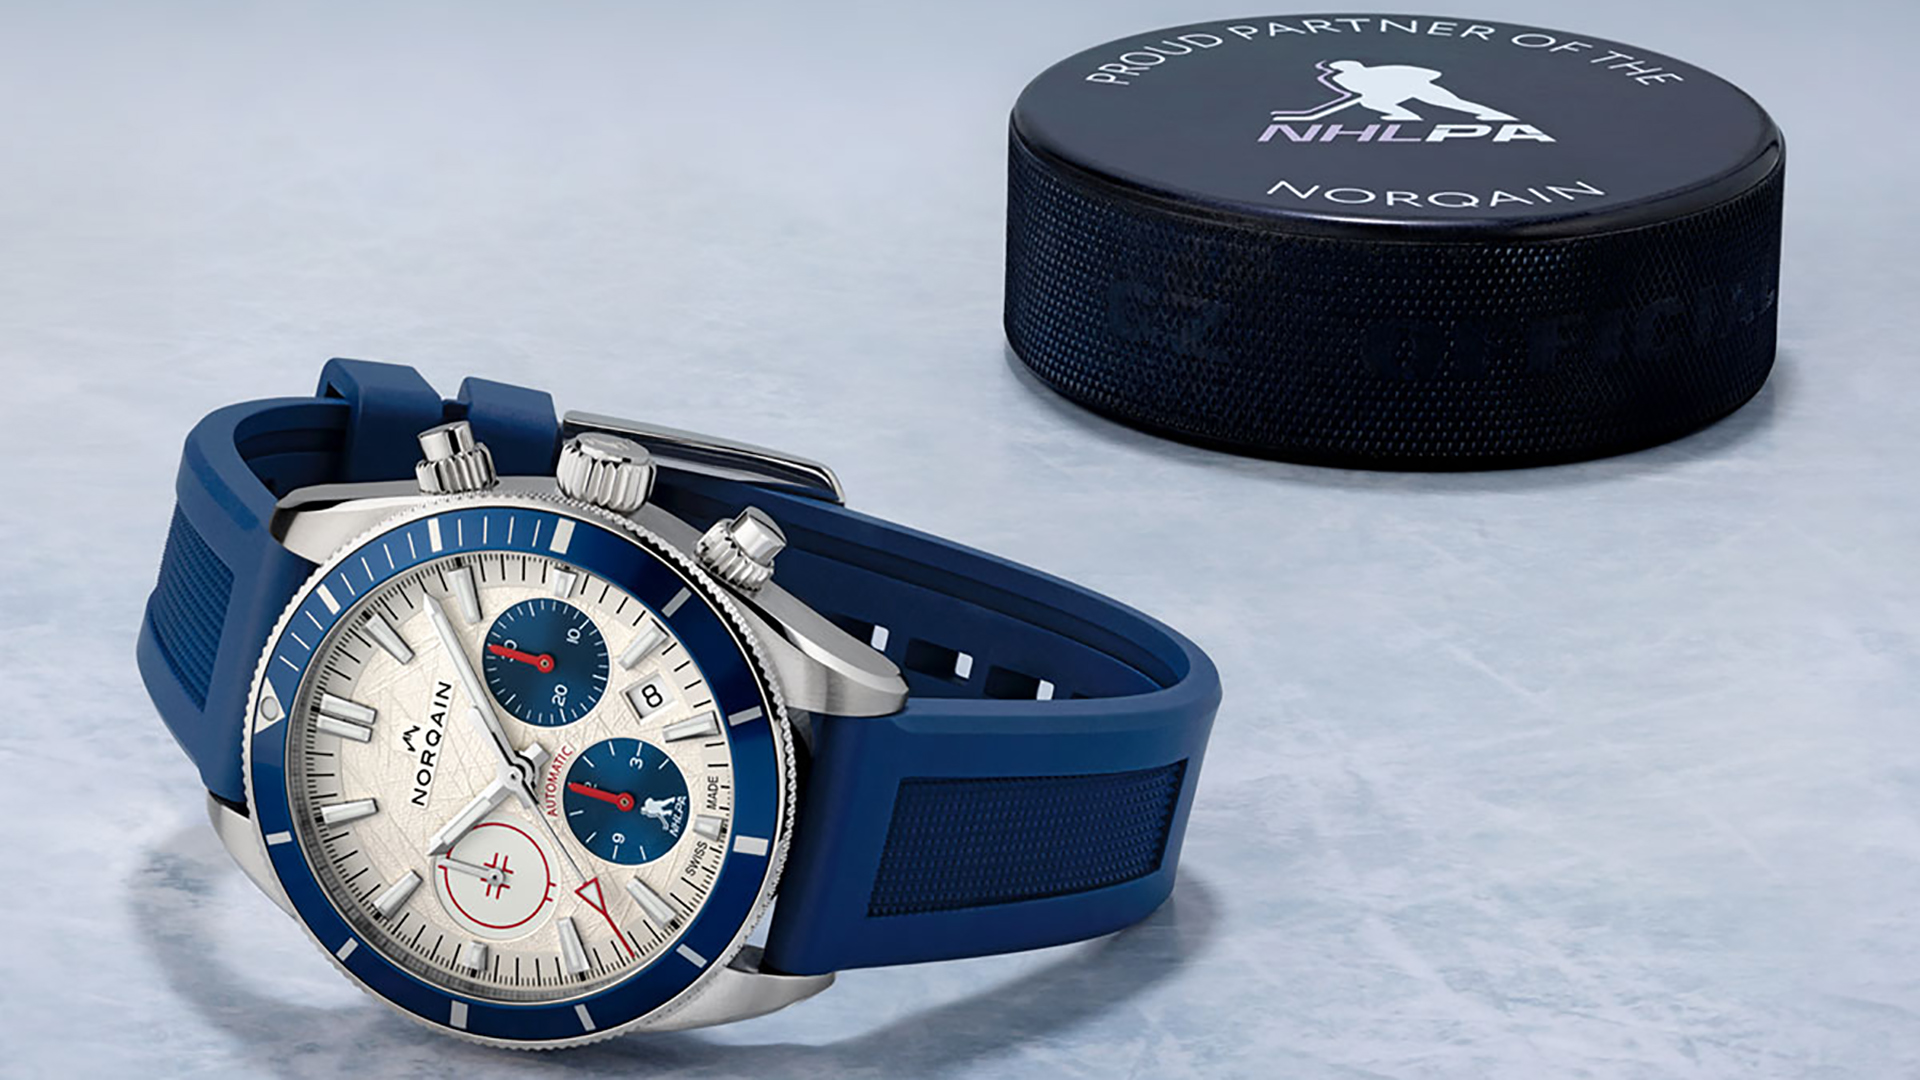 NORQAIN Announces New Limited Edition Adventure Sport Chrono NHLPA In Partnership With NHL Players Association aBlogtoWatch